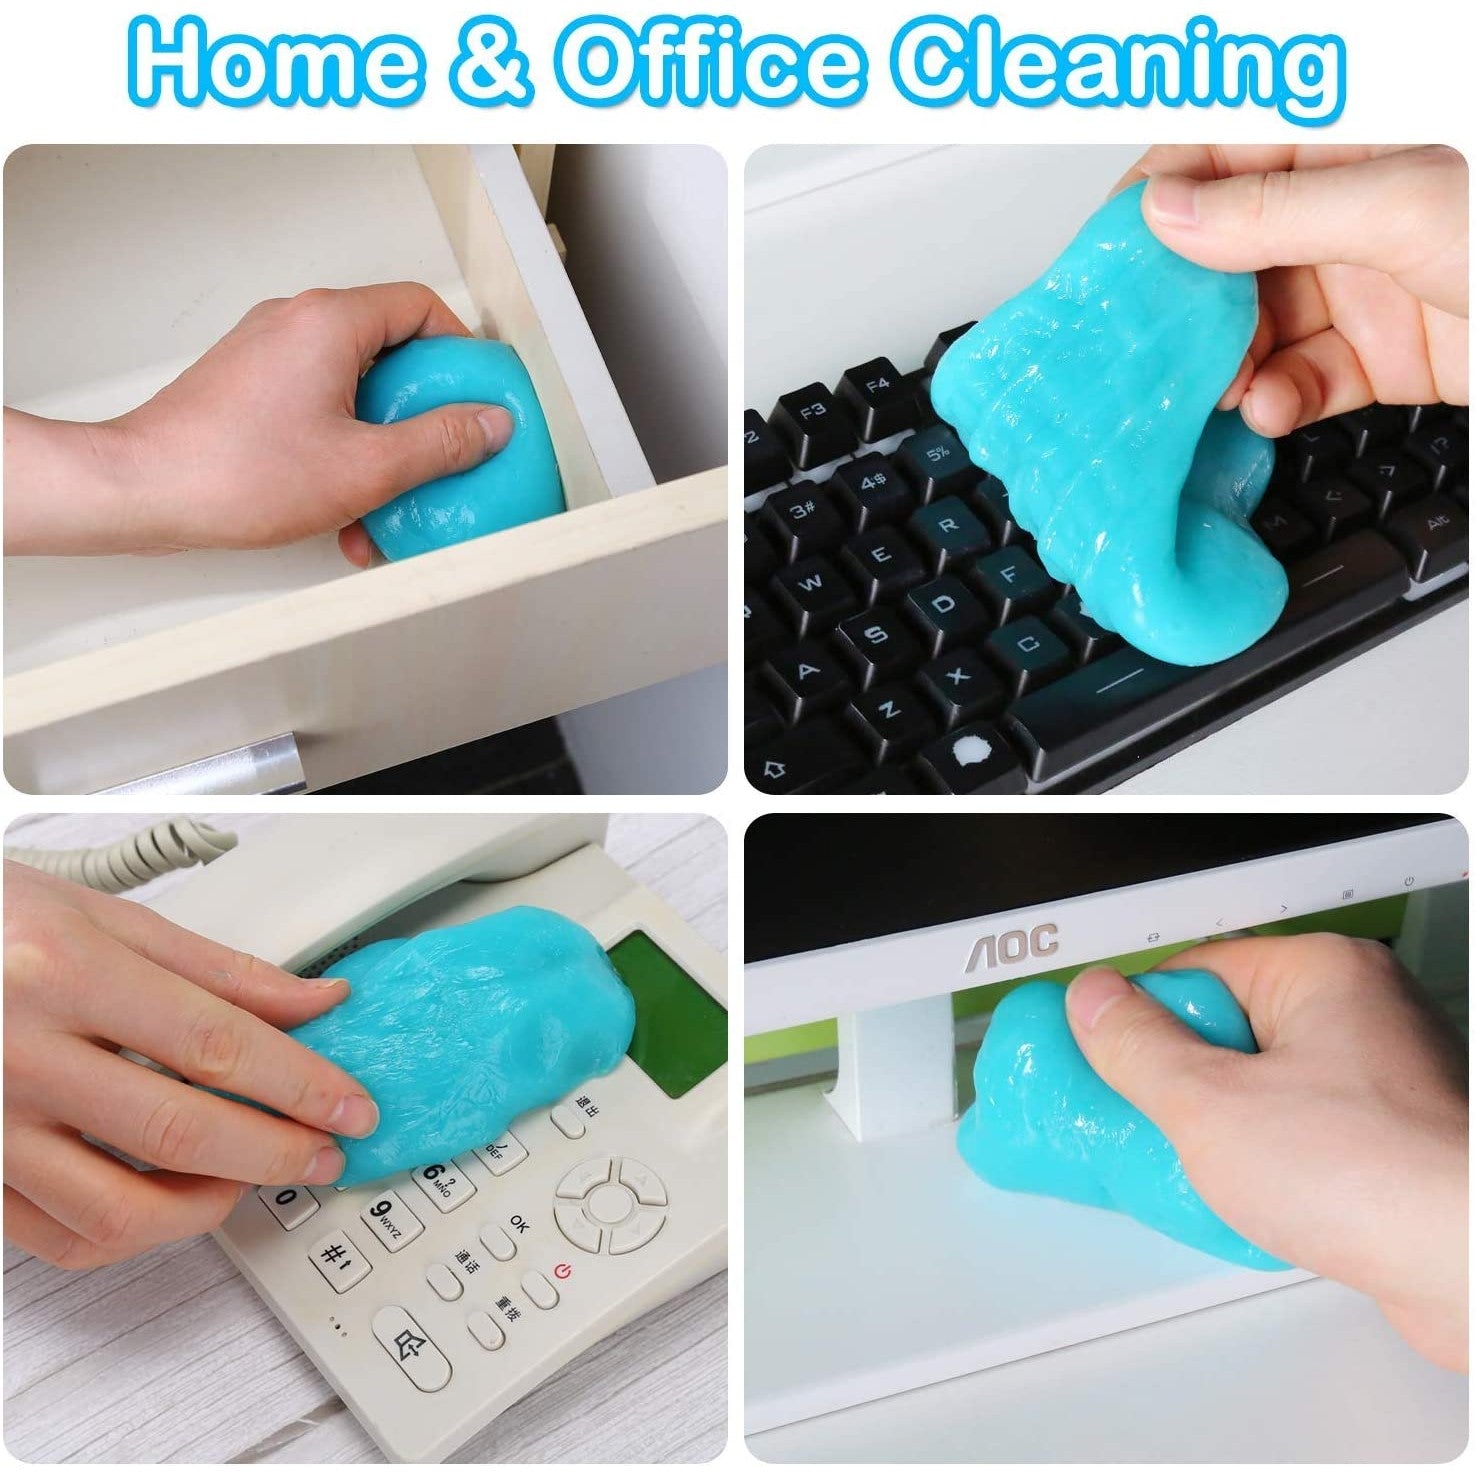 A collage of 4 photos showing blue gel being used to clean various objects and areas.